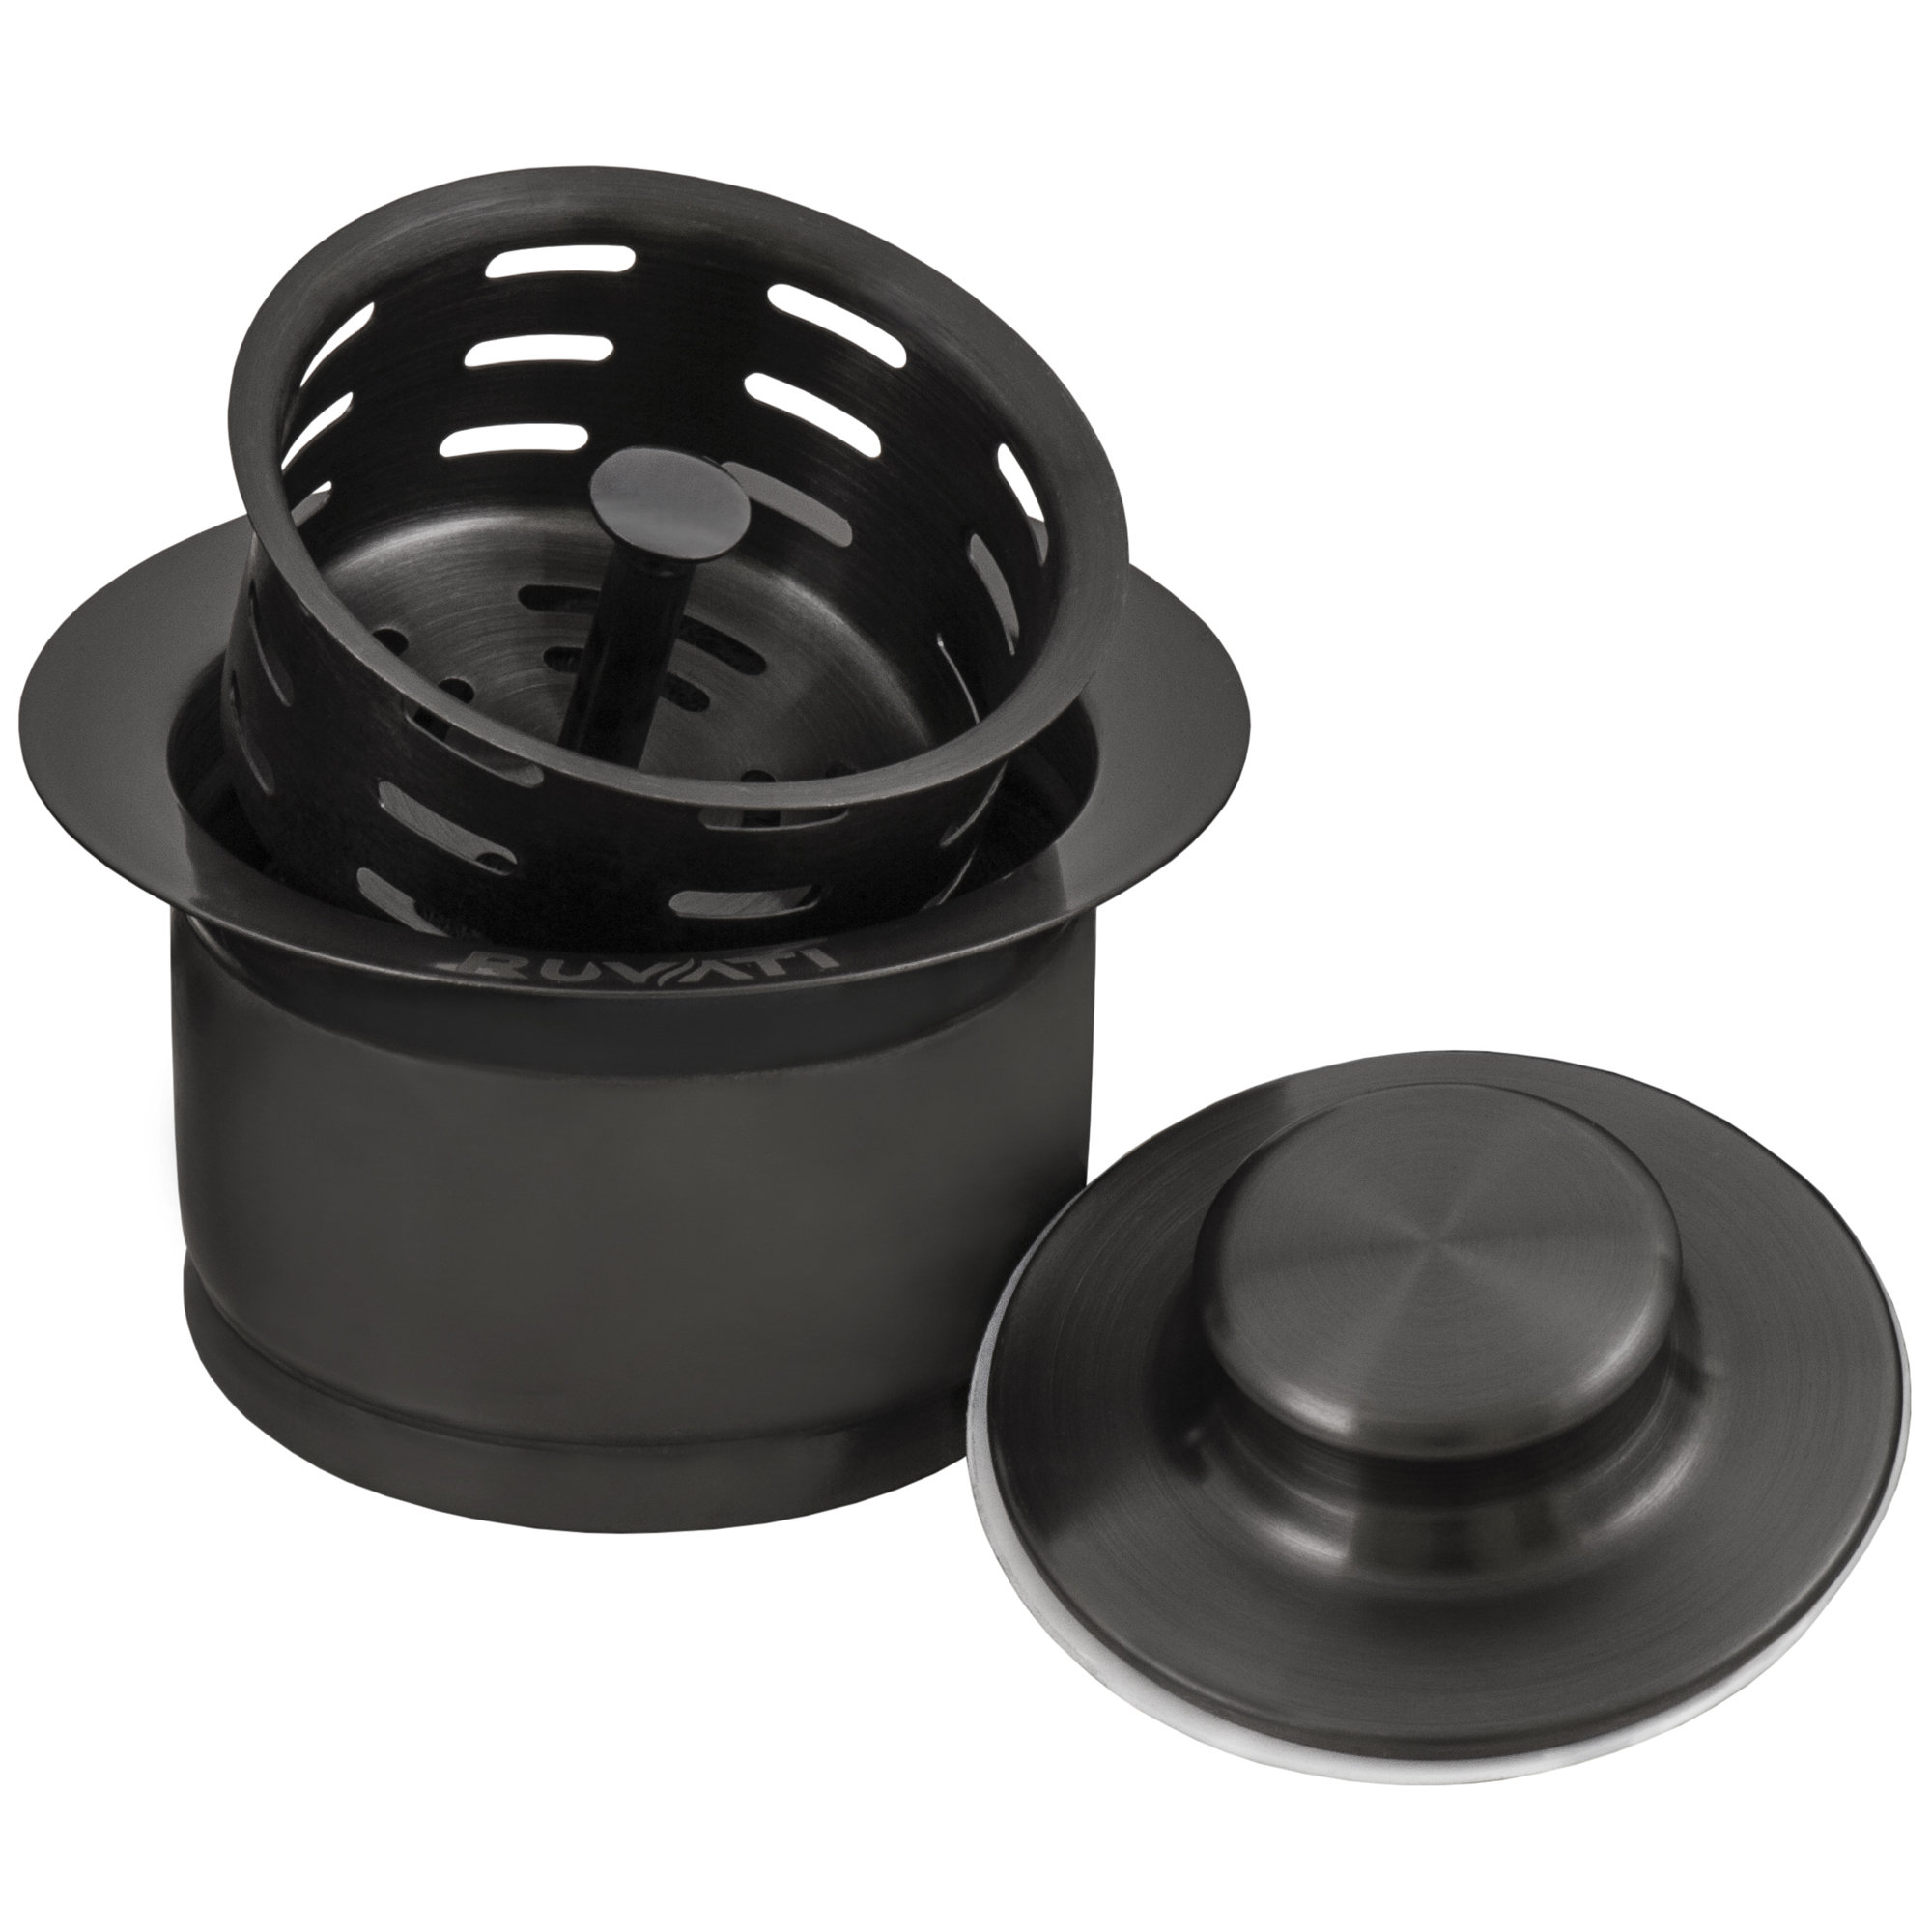 Ruvati Extended Garbage Disposal Flange with Deep Basket and Stopper - Gunmetal Black Stainless Steel - RVA1052BL